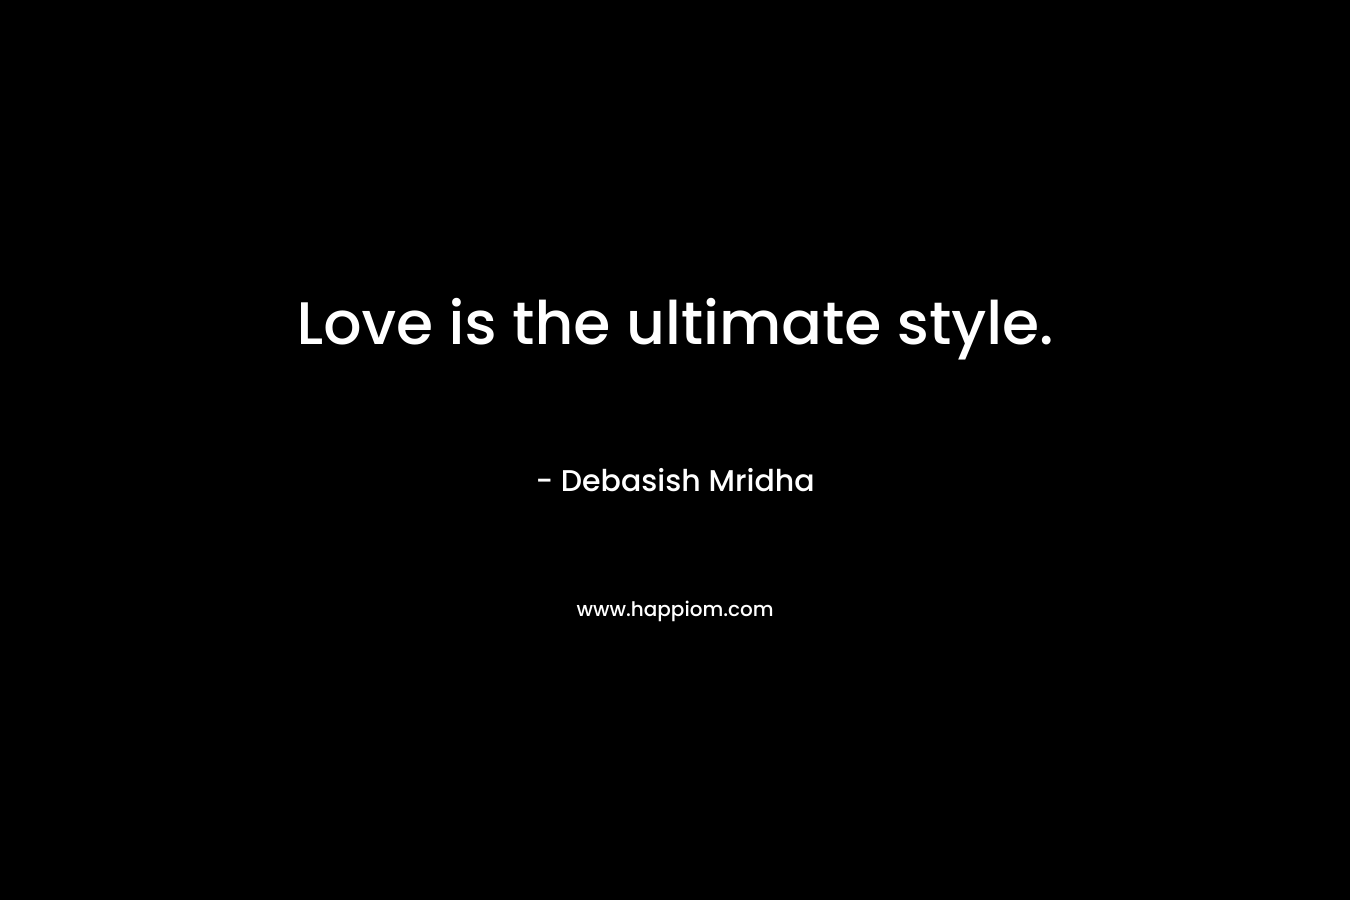 Love is the ultimate style.